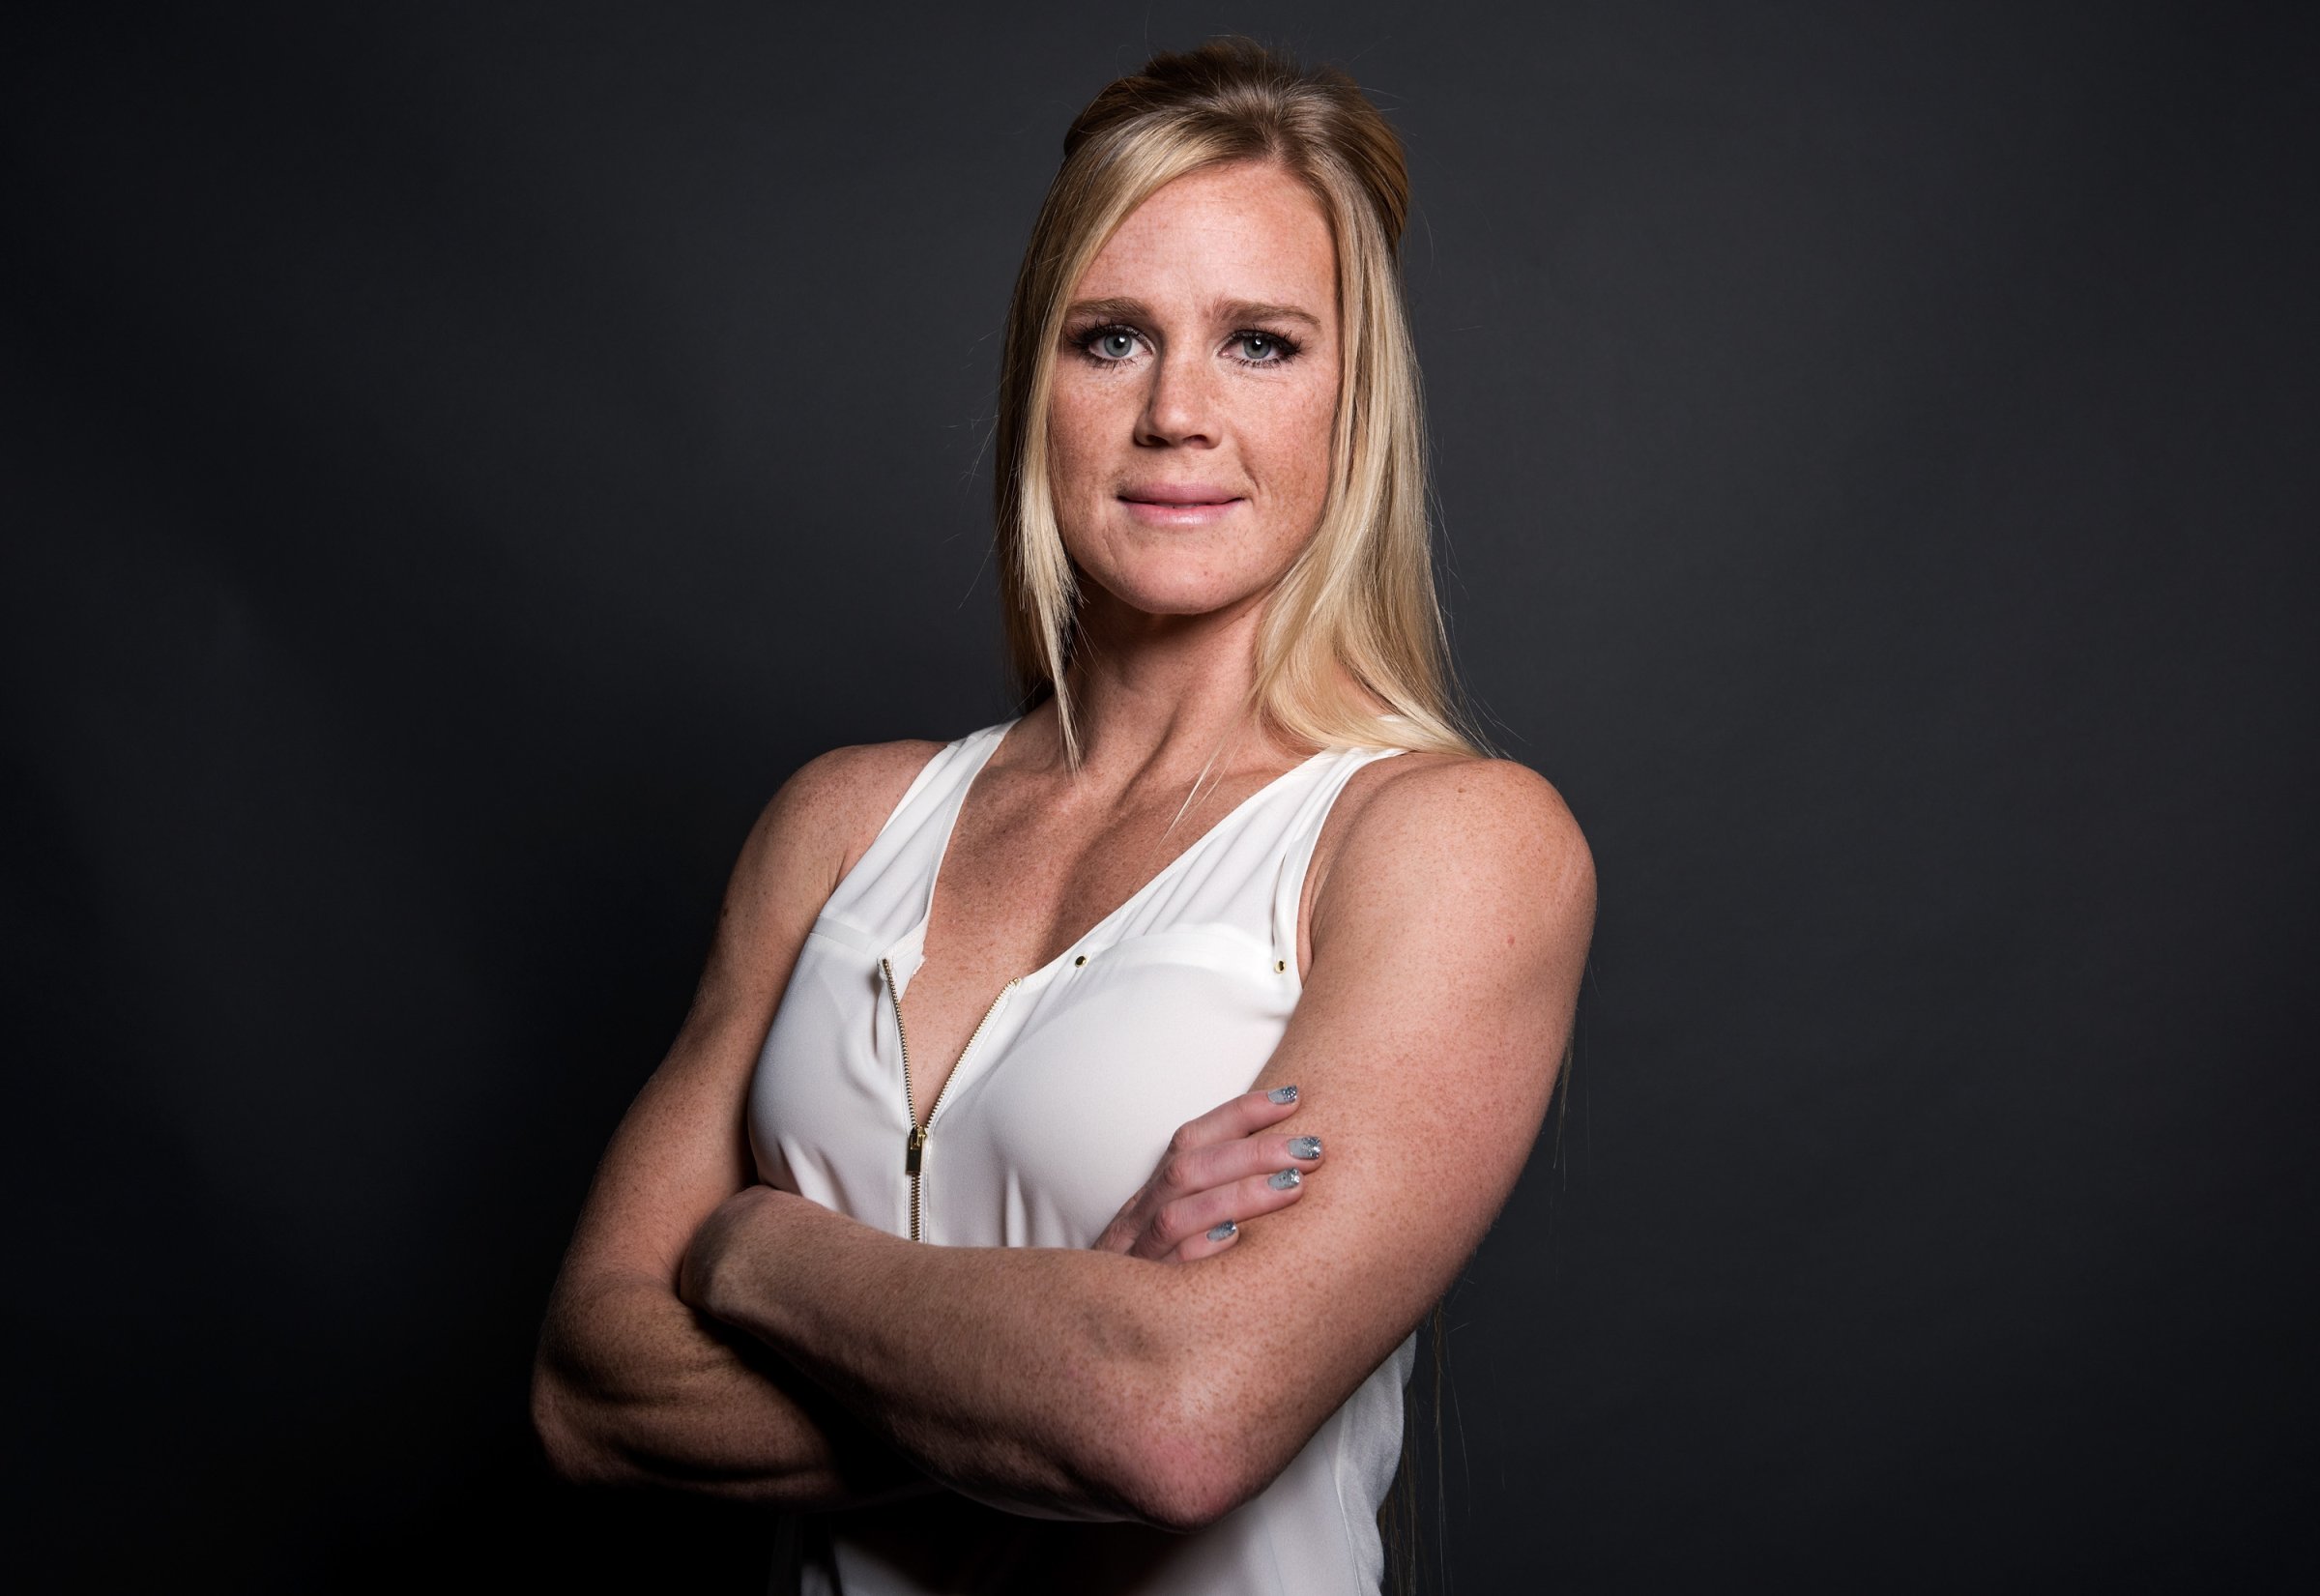 UFC bantamweight champion Holly Holm poses for a portrait backstage during the UFC 197 on-sale press conference event inside MGM Grand Hotel & Casino on January 20, 2016 in Las Vegas, Nevada.